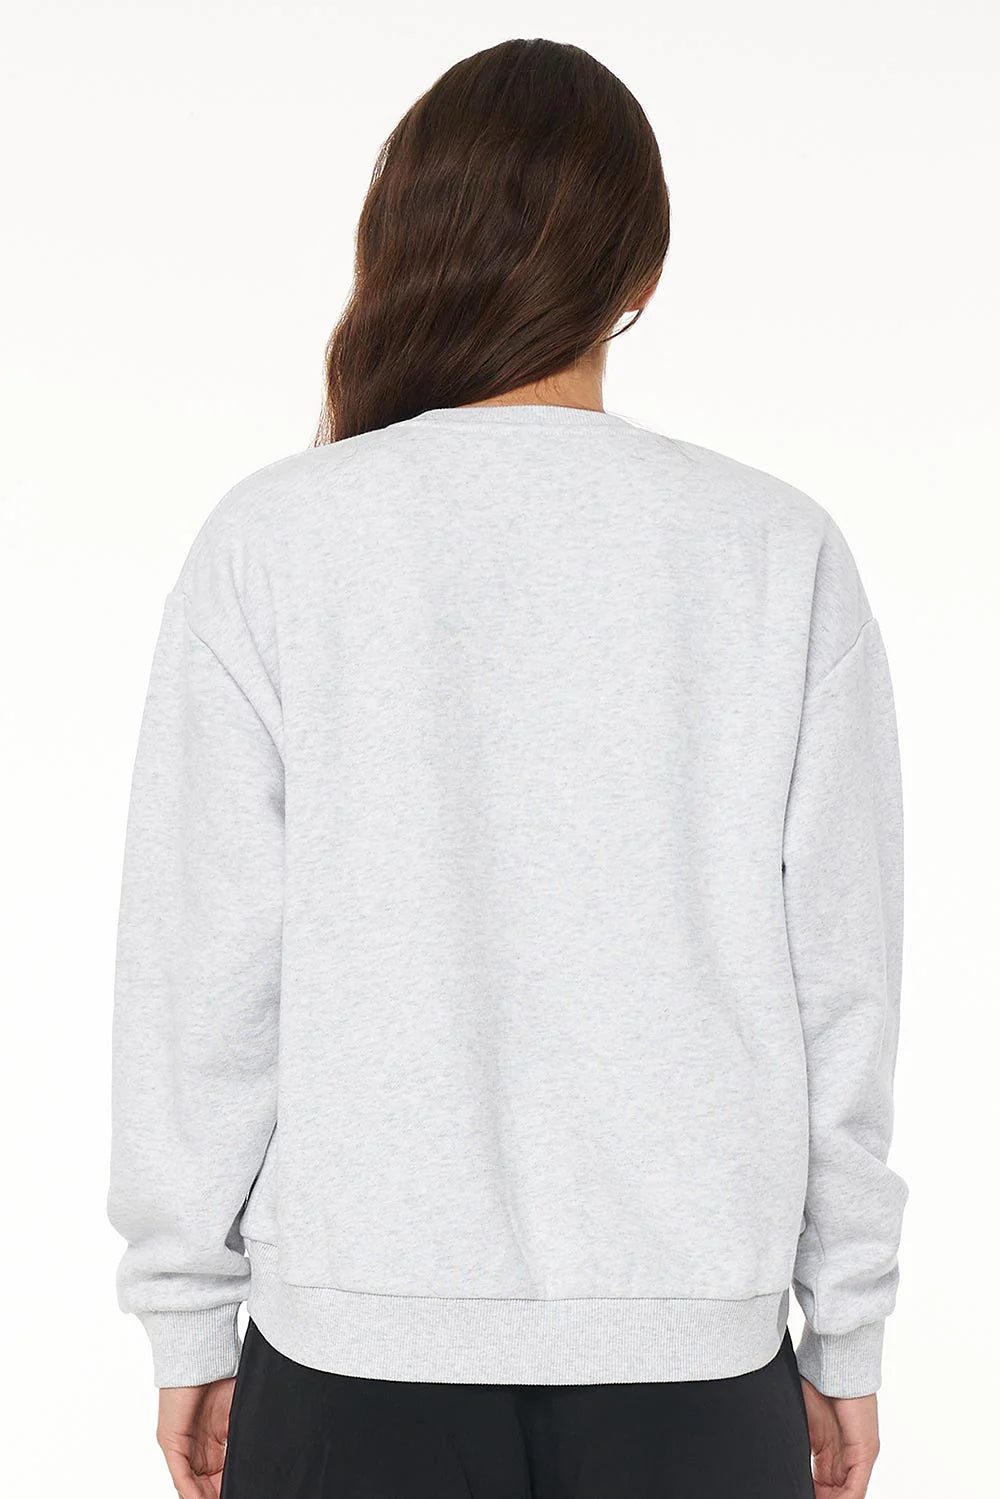 Slouch Crew Fountain Siver Marle